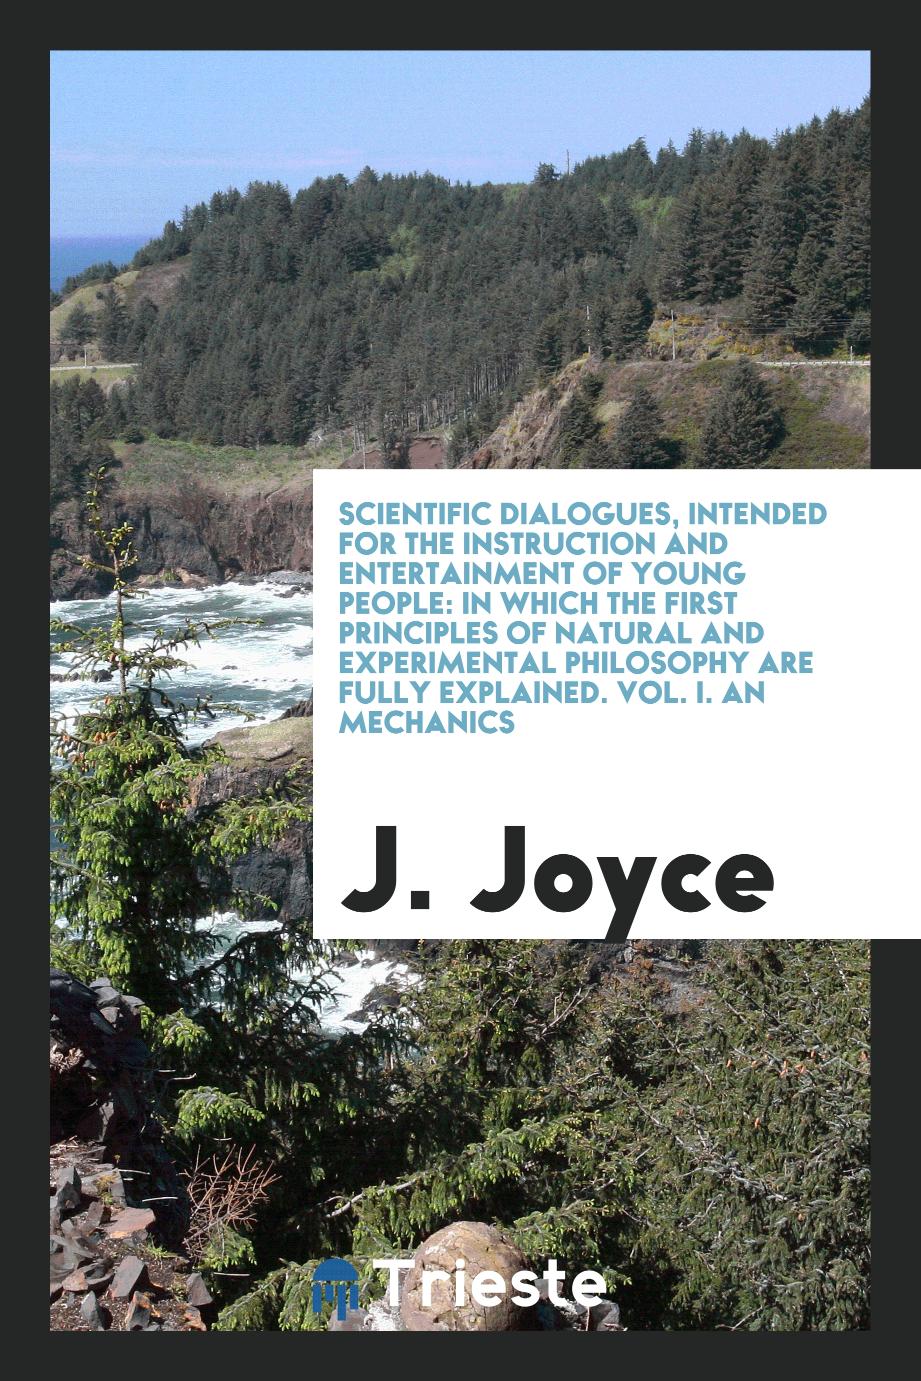 Scientific Dialogues, Intended for the Instruction and Entertainment of Young People: In Which the First Principles of Natural and Experimental Philosophy Are Fully Explained. Vol. I. An Mechanics